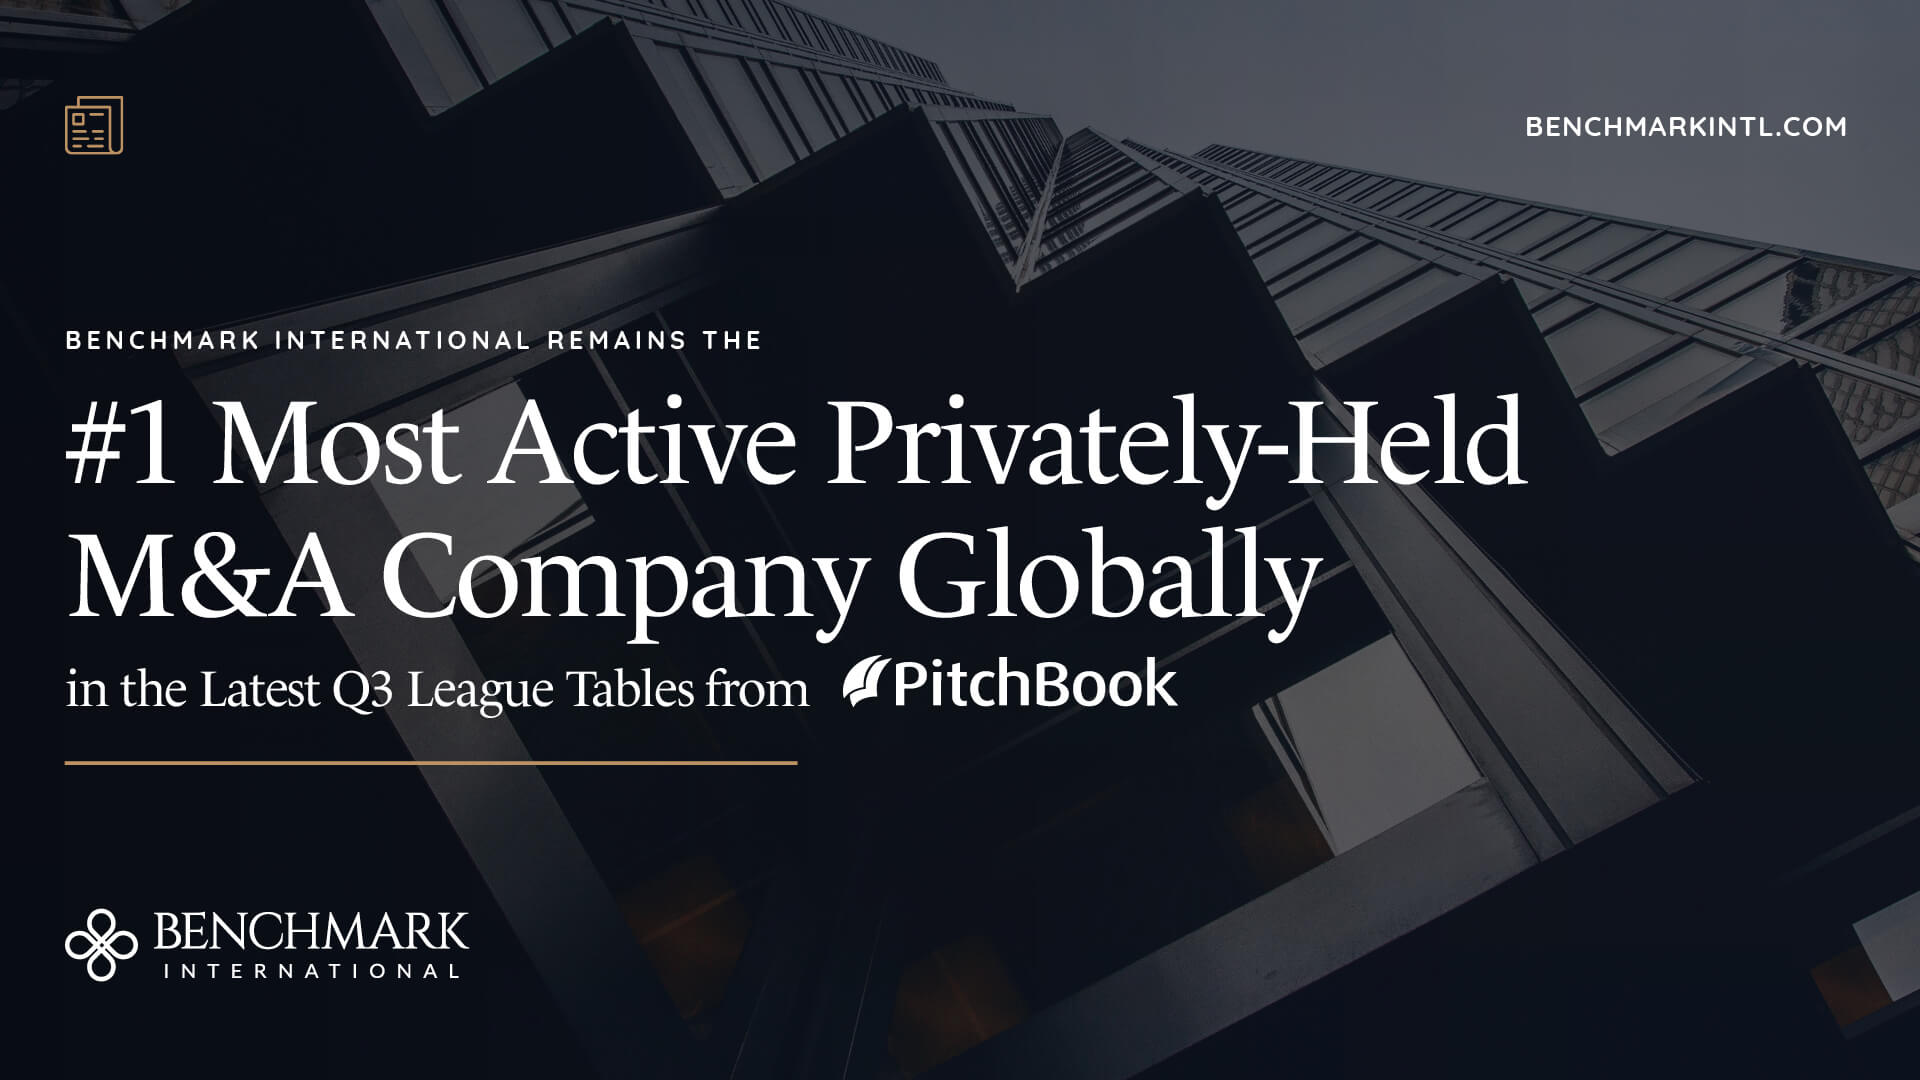 Benchmark International Remains The #1 Most Active Privately-held M&A Company Globally In The Latest Q3 League Tables From Pitchbook